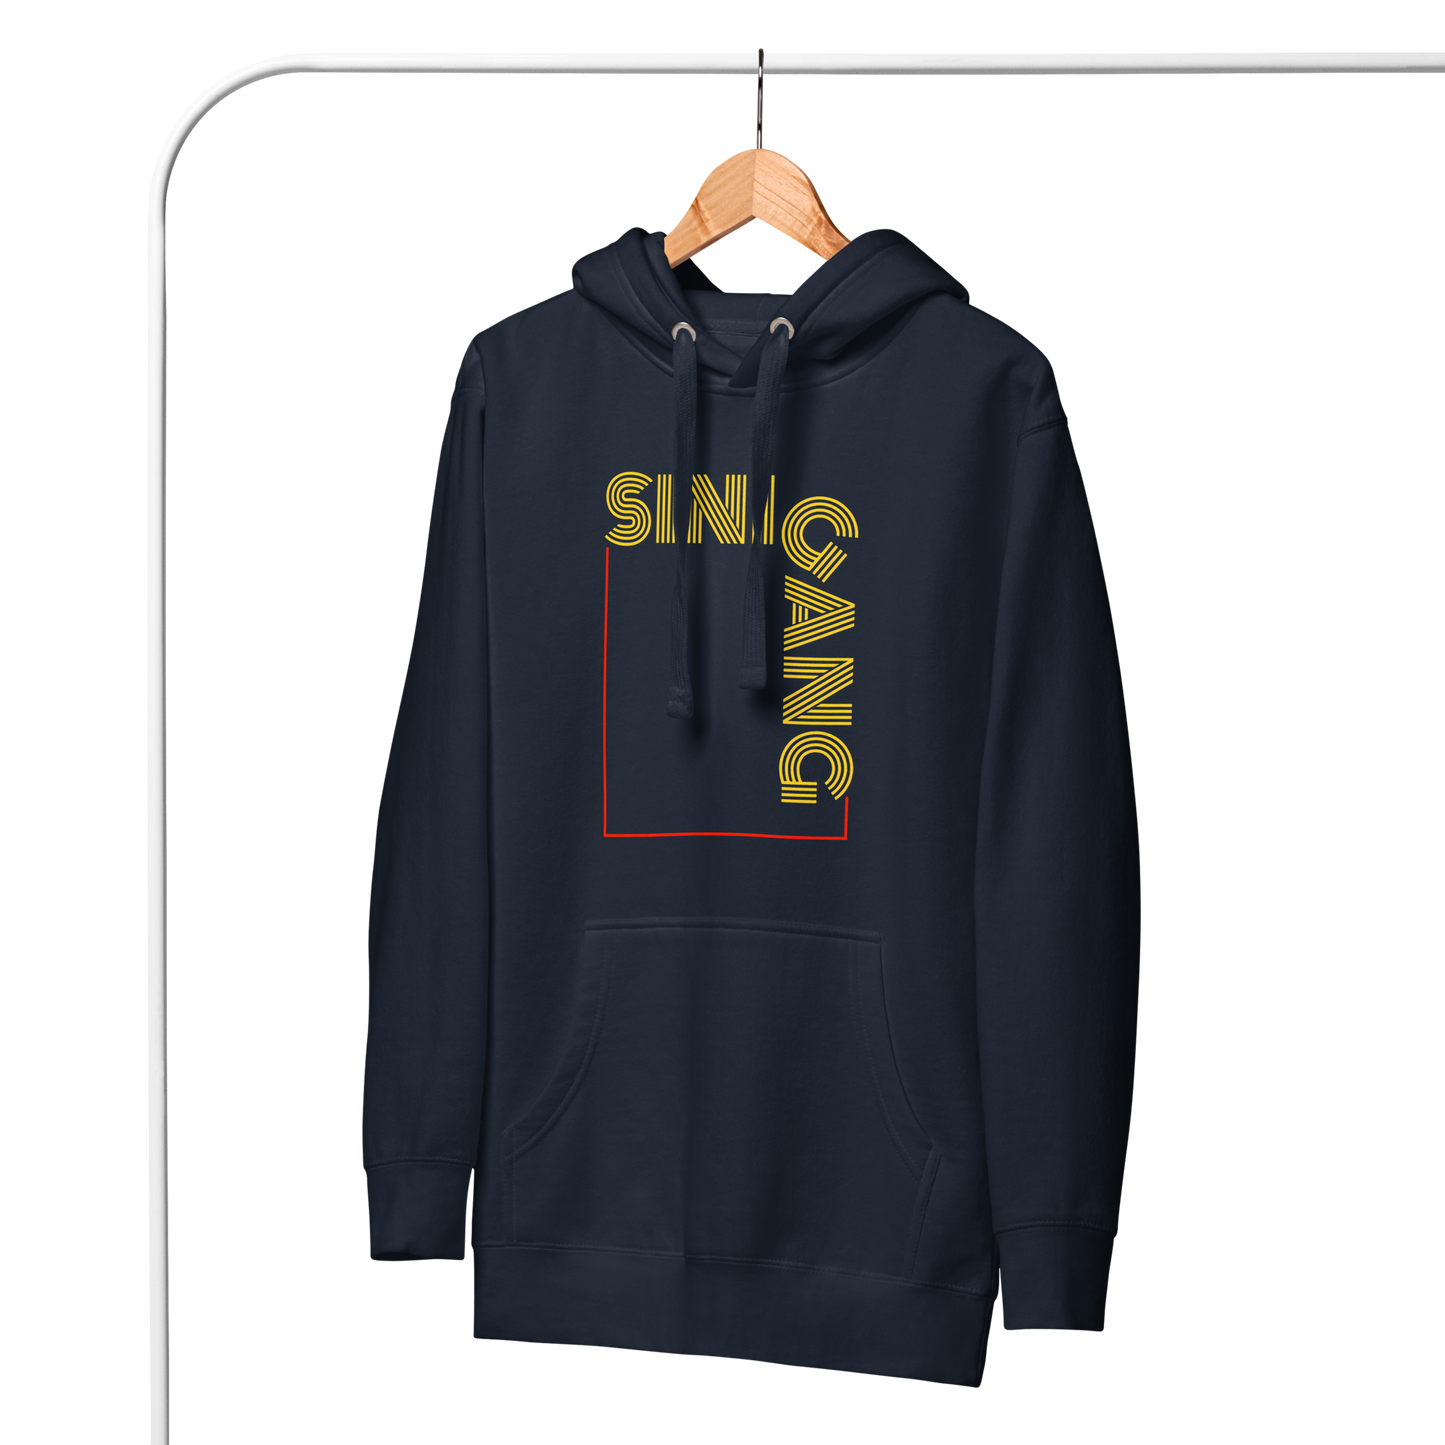 Filipino Hoodie Sinigang Pinoy Food Merch in color variant Navy